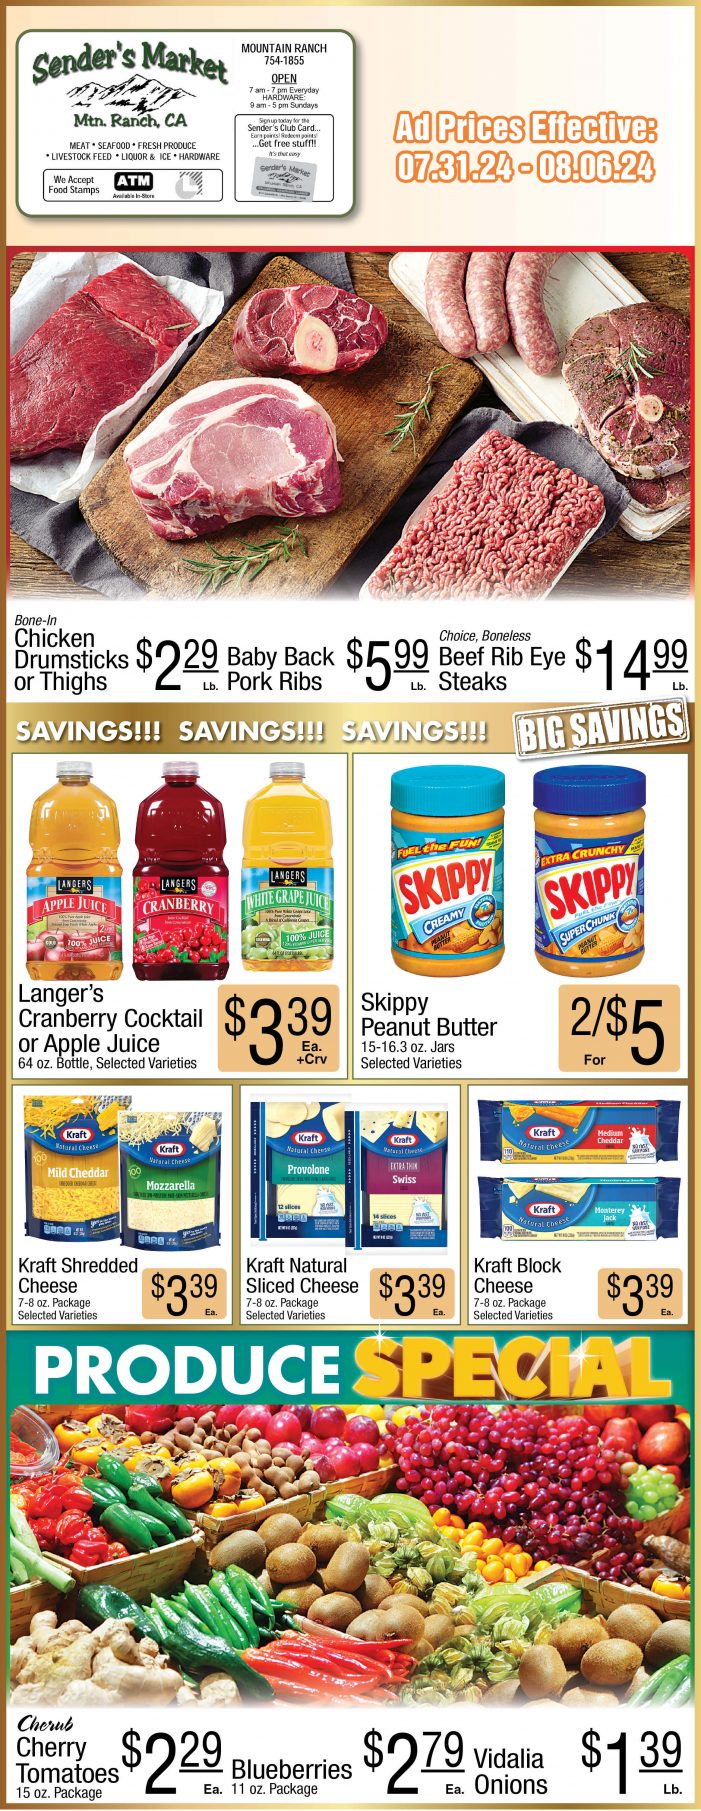 Sender’s Market Weekly Ad & Grocery Specials Through August 6th! Shop Local & Save!!